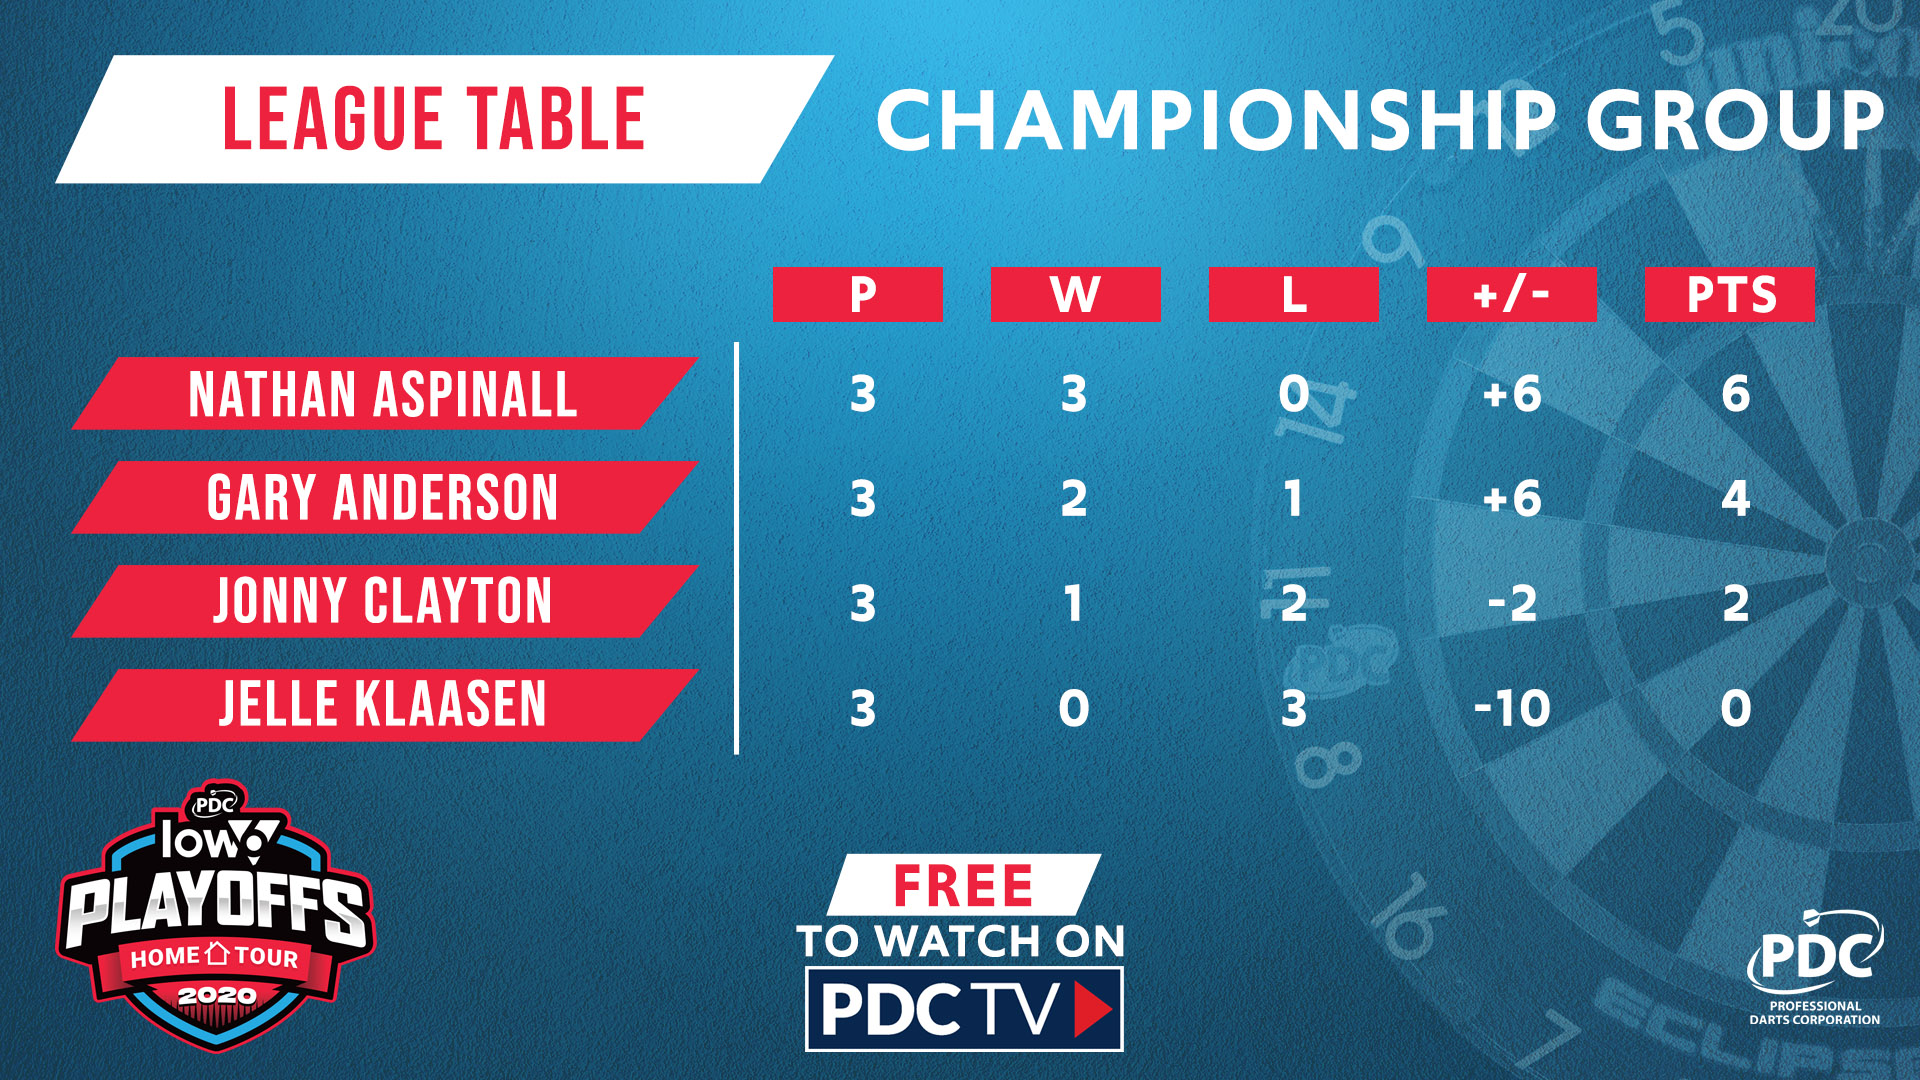 Championship Group table